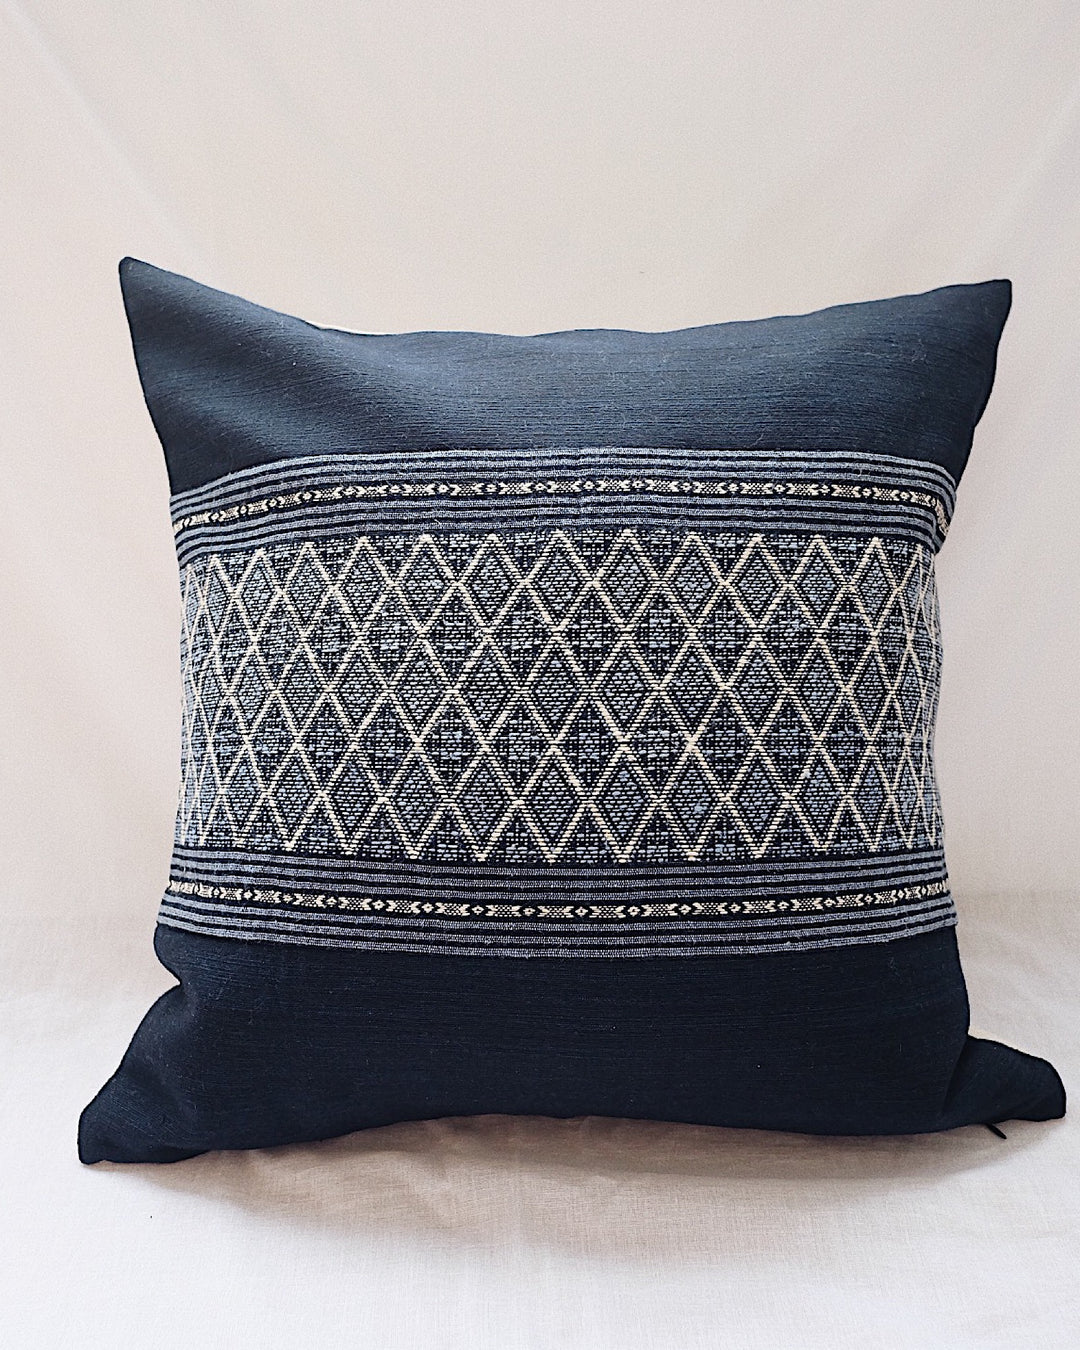 Hill Tribe Handwoven Pillow Cover No.4 | Olive & Iris 